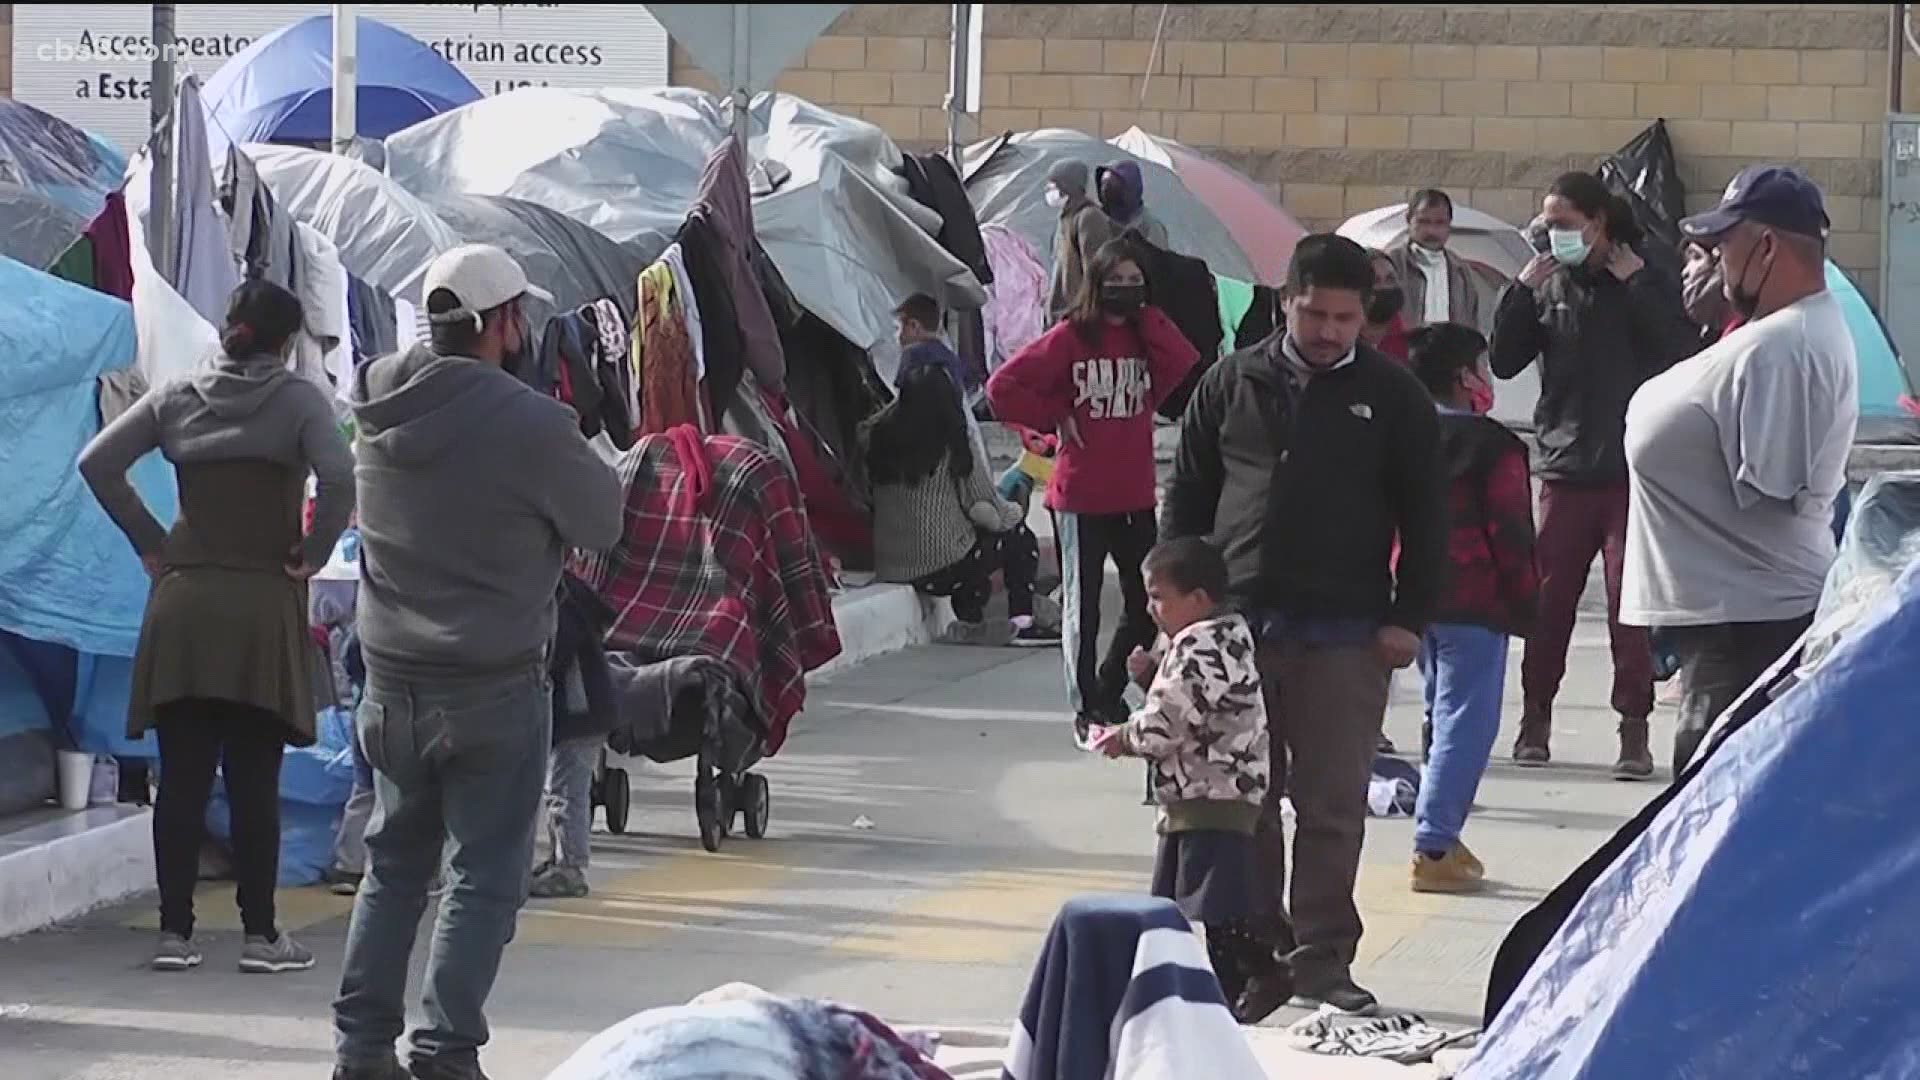 More asylum seekers have begun arriving in Tijuana. While apprehensions are up in San Diego, it lags other parts of the southwest border.